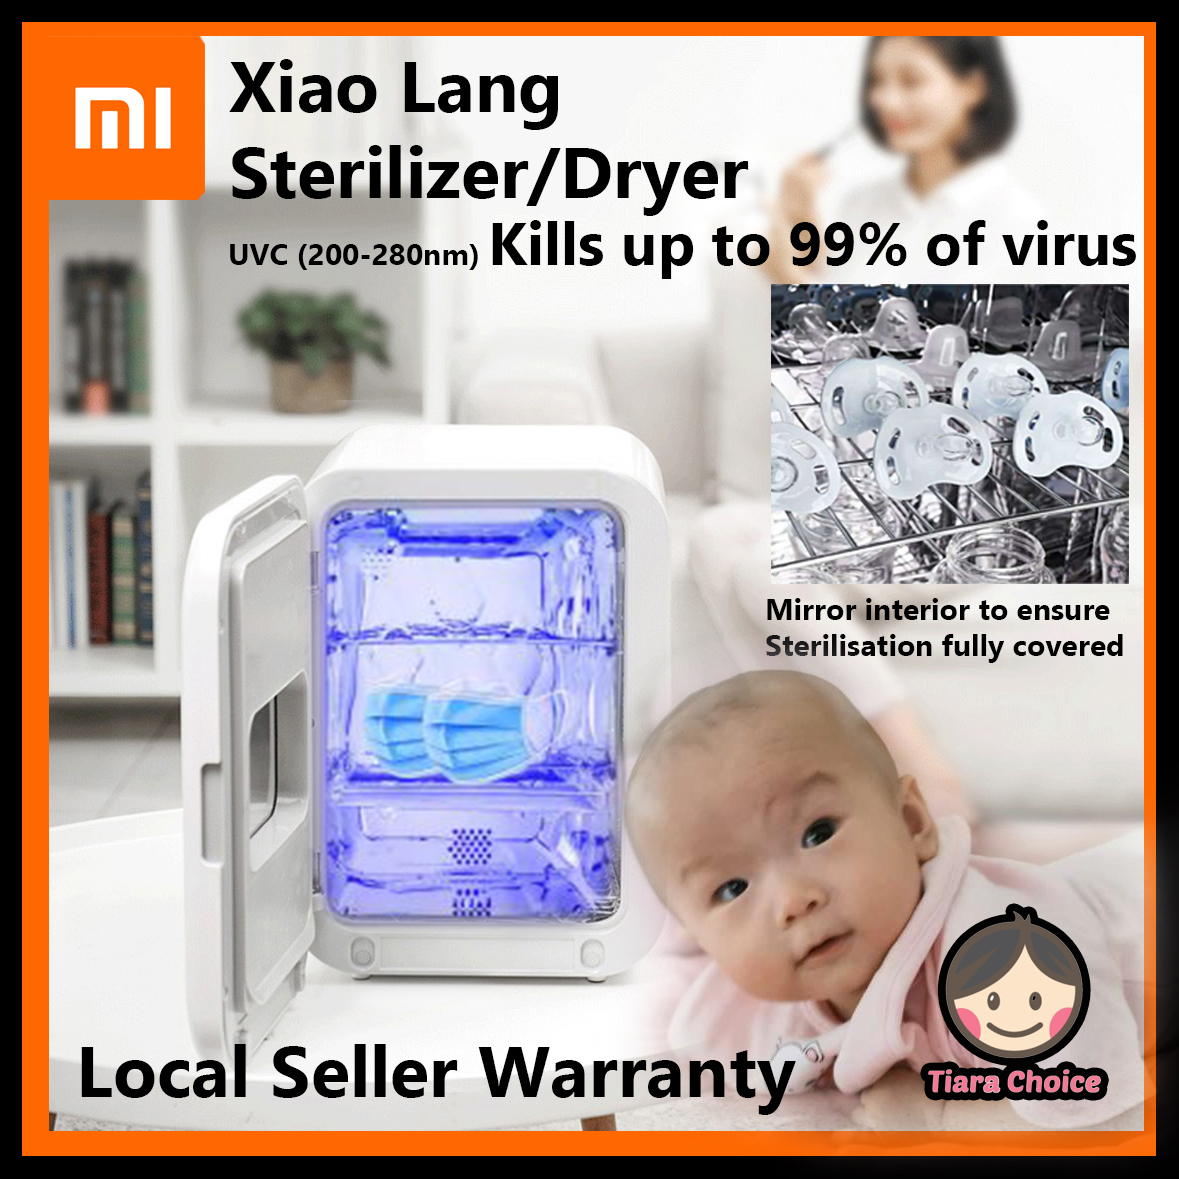 Xiao Lang, UVc Multi-purpose sterilizer. For infant, For face or for kitchen utensil. UV Sterilizer lamp, Dryer. | Lazada Singapore